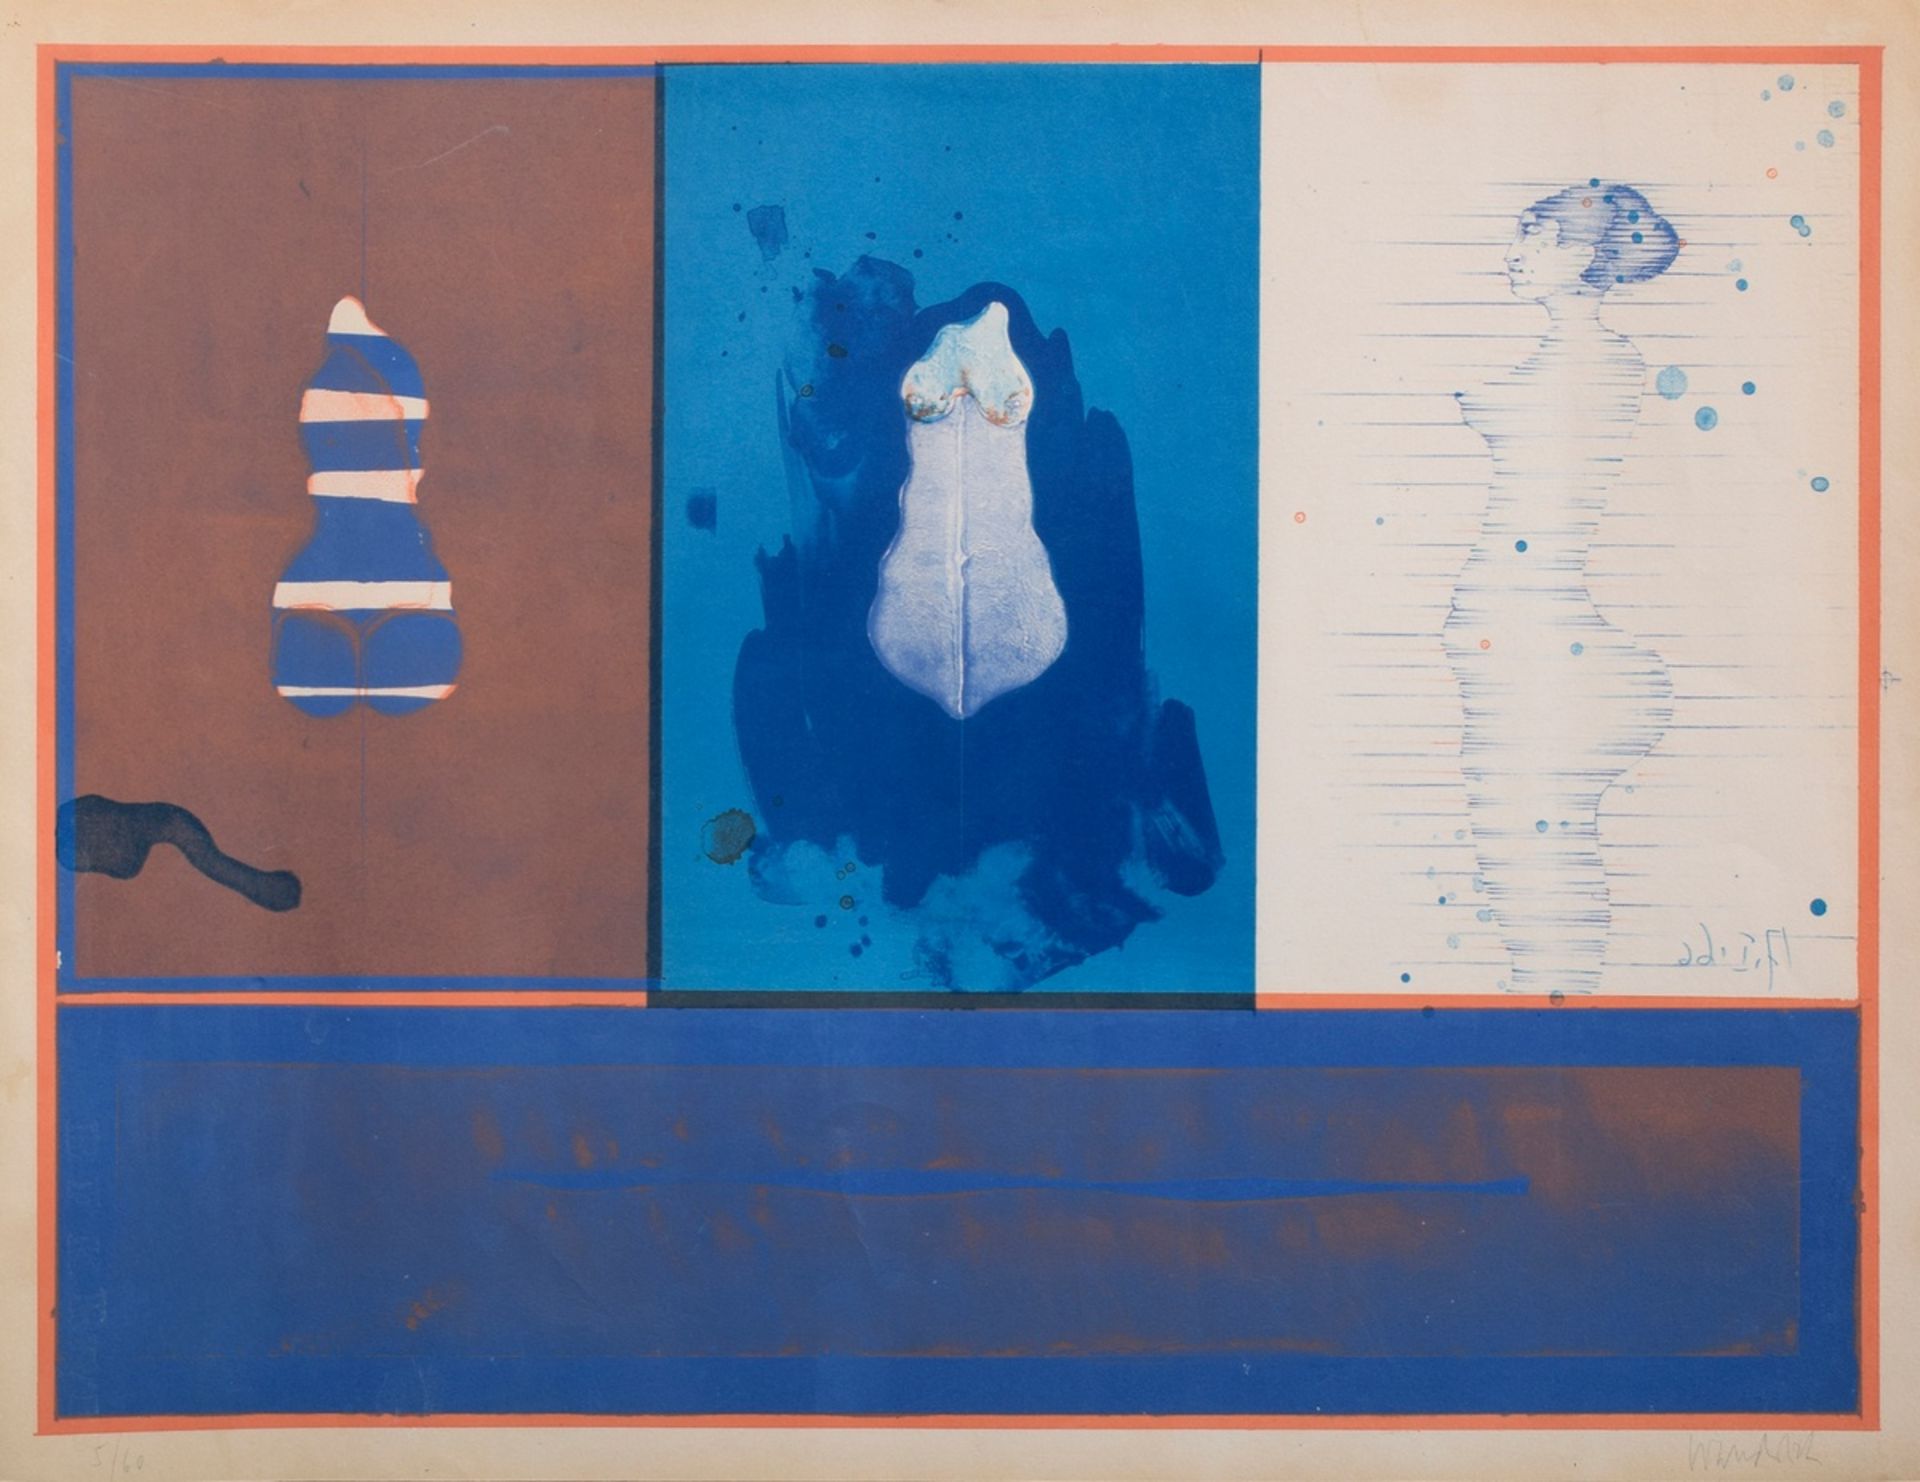 Wunderlich, Paul (1927-2010) "Corpus delicti I (homme)" and "Corpus delicti II (femme)" 1966, colou - Image 3 of 4